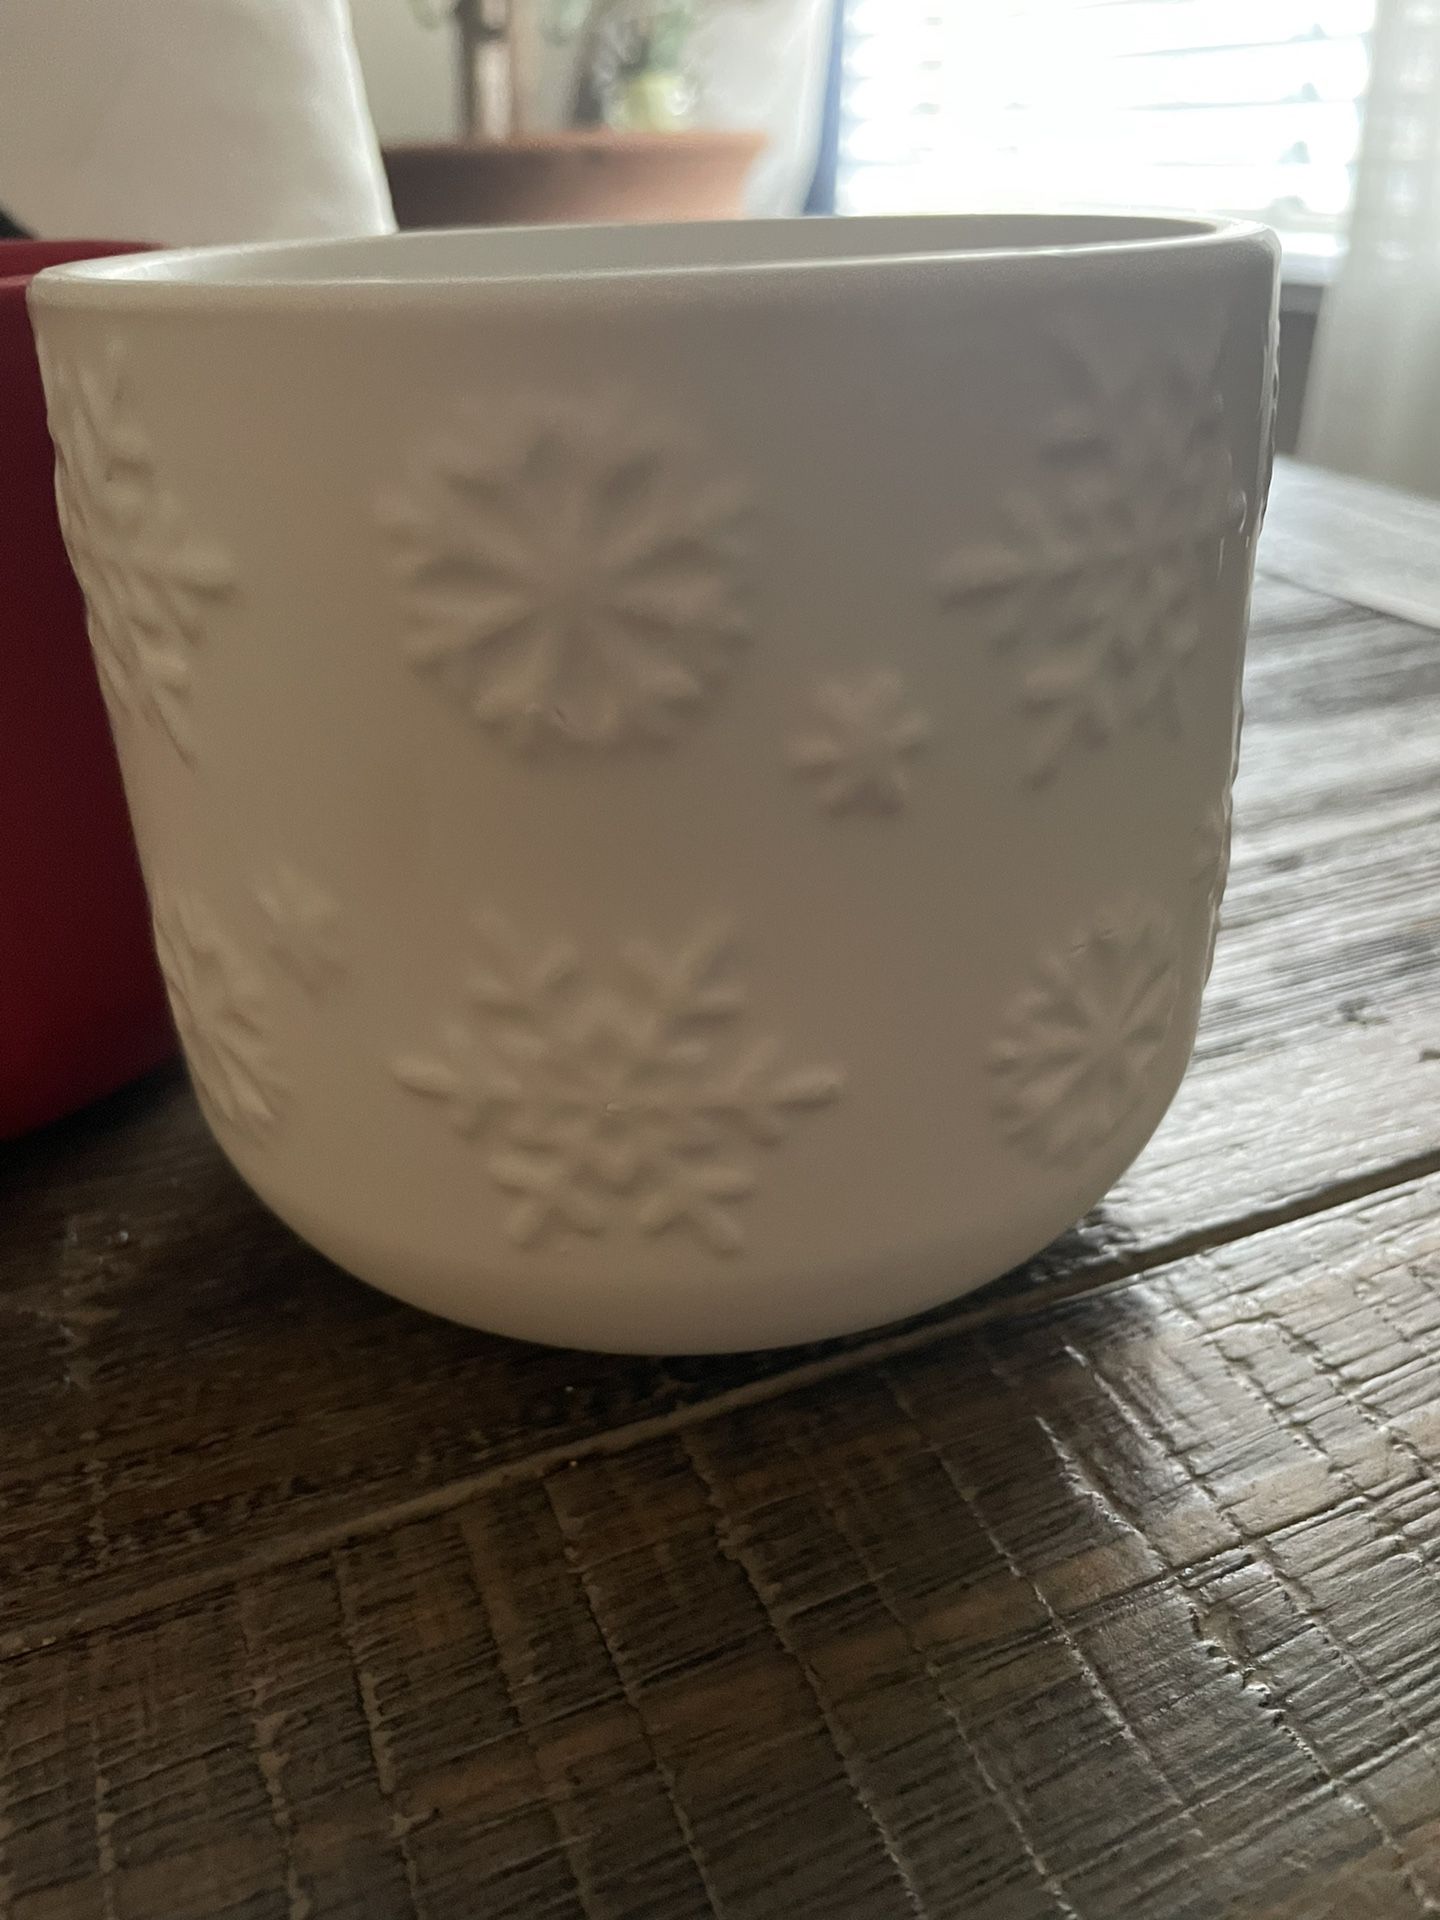 New in Package LODGE Pot Protectors for Sale in Las Vegas, NV - OfferUp